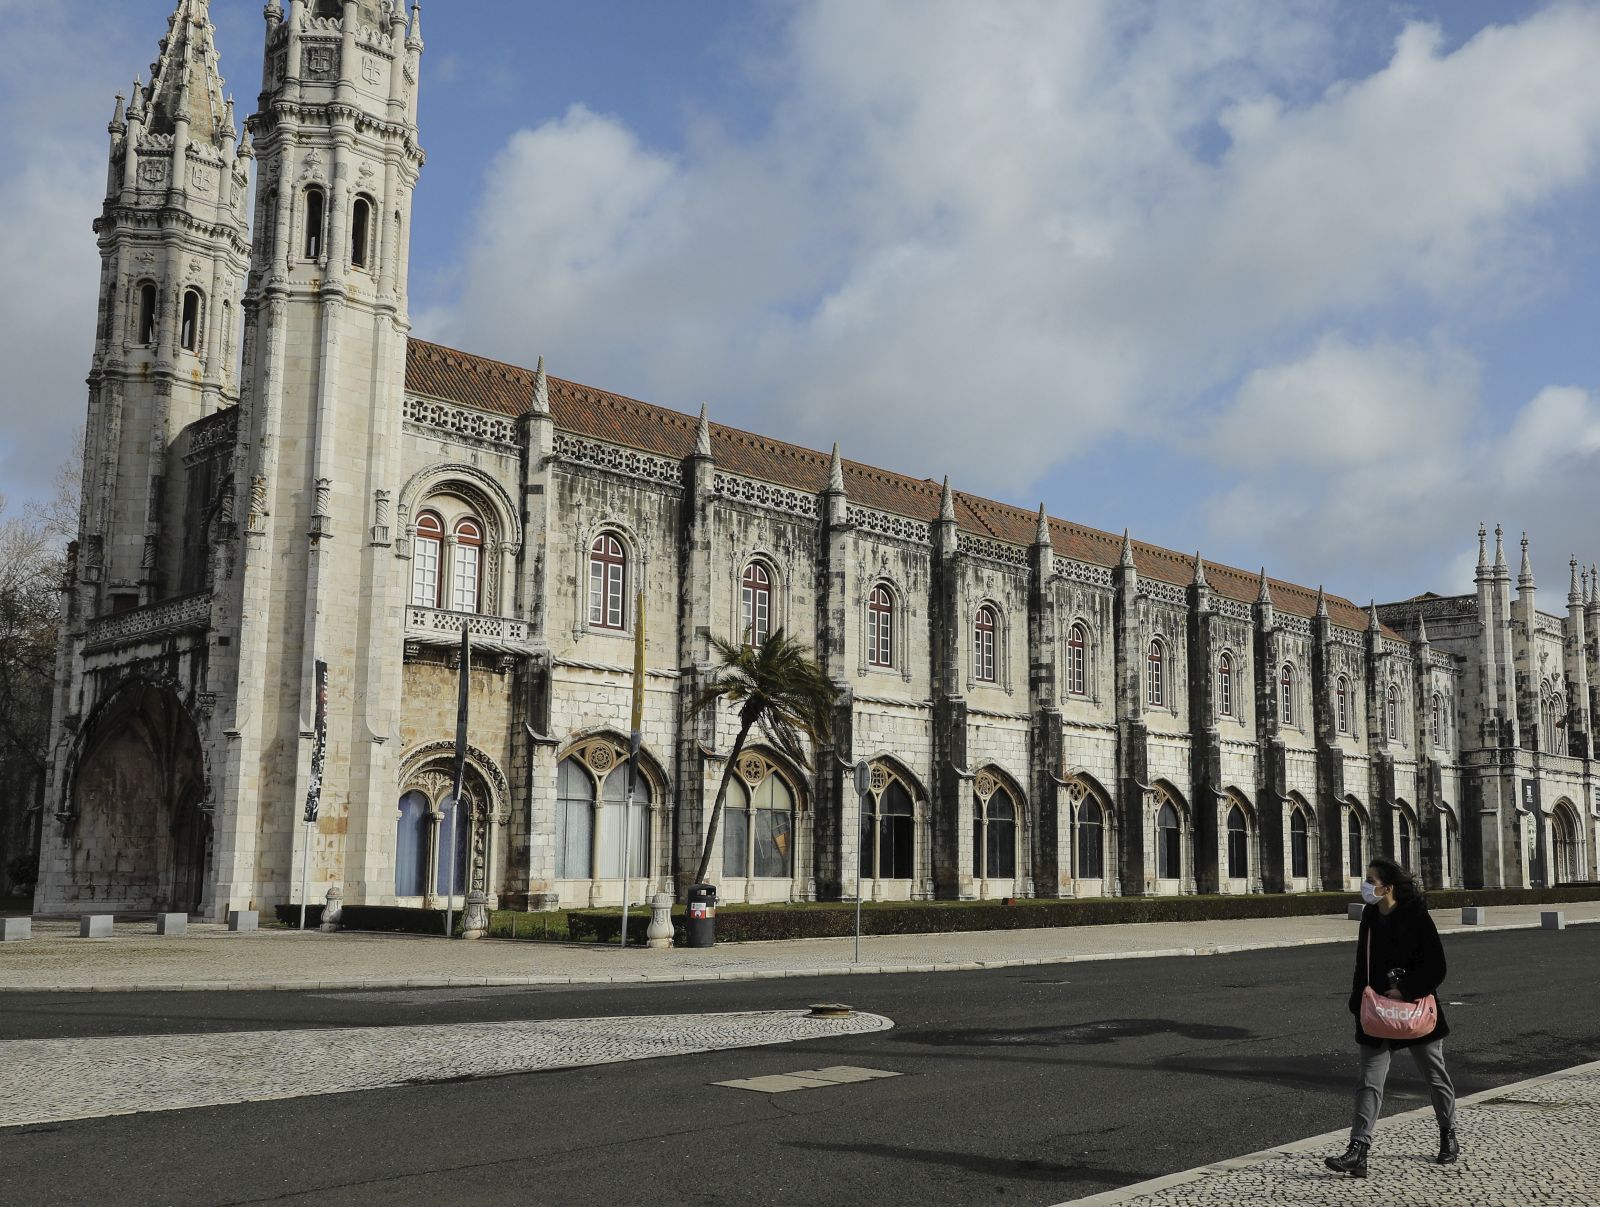 epa08957560 A pedestrian walks near Jeronimos Monastery in Lisbon, Portugal, 22 January 2021. All schools at all levels of education are closed as of 22 January for two weeks, a measure announced on 21 January by the government to contain the COVID-19 pandemic.  EPA/MIGUEL A. LOPES